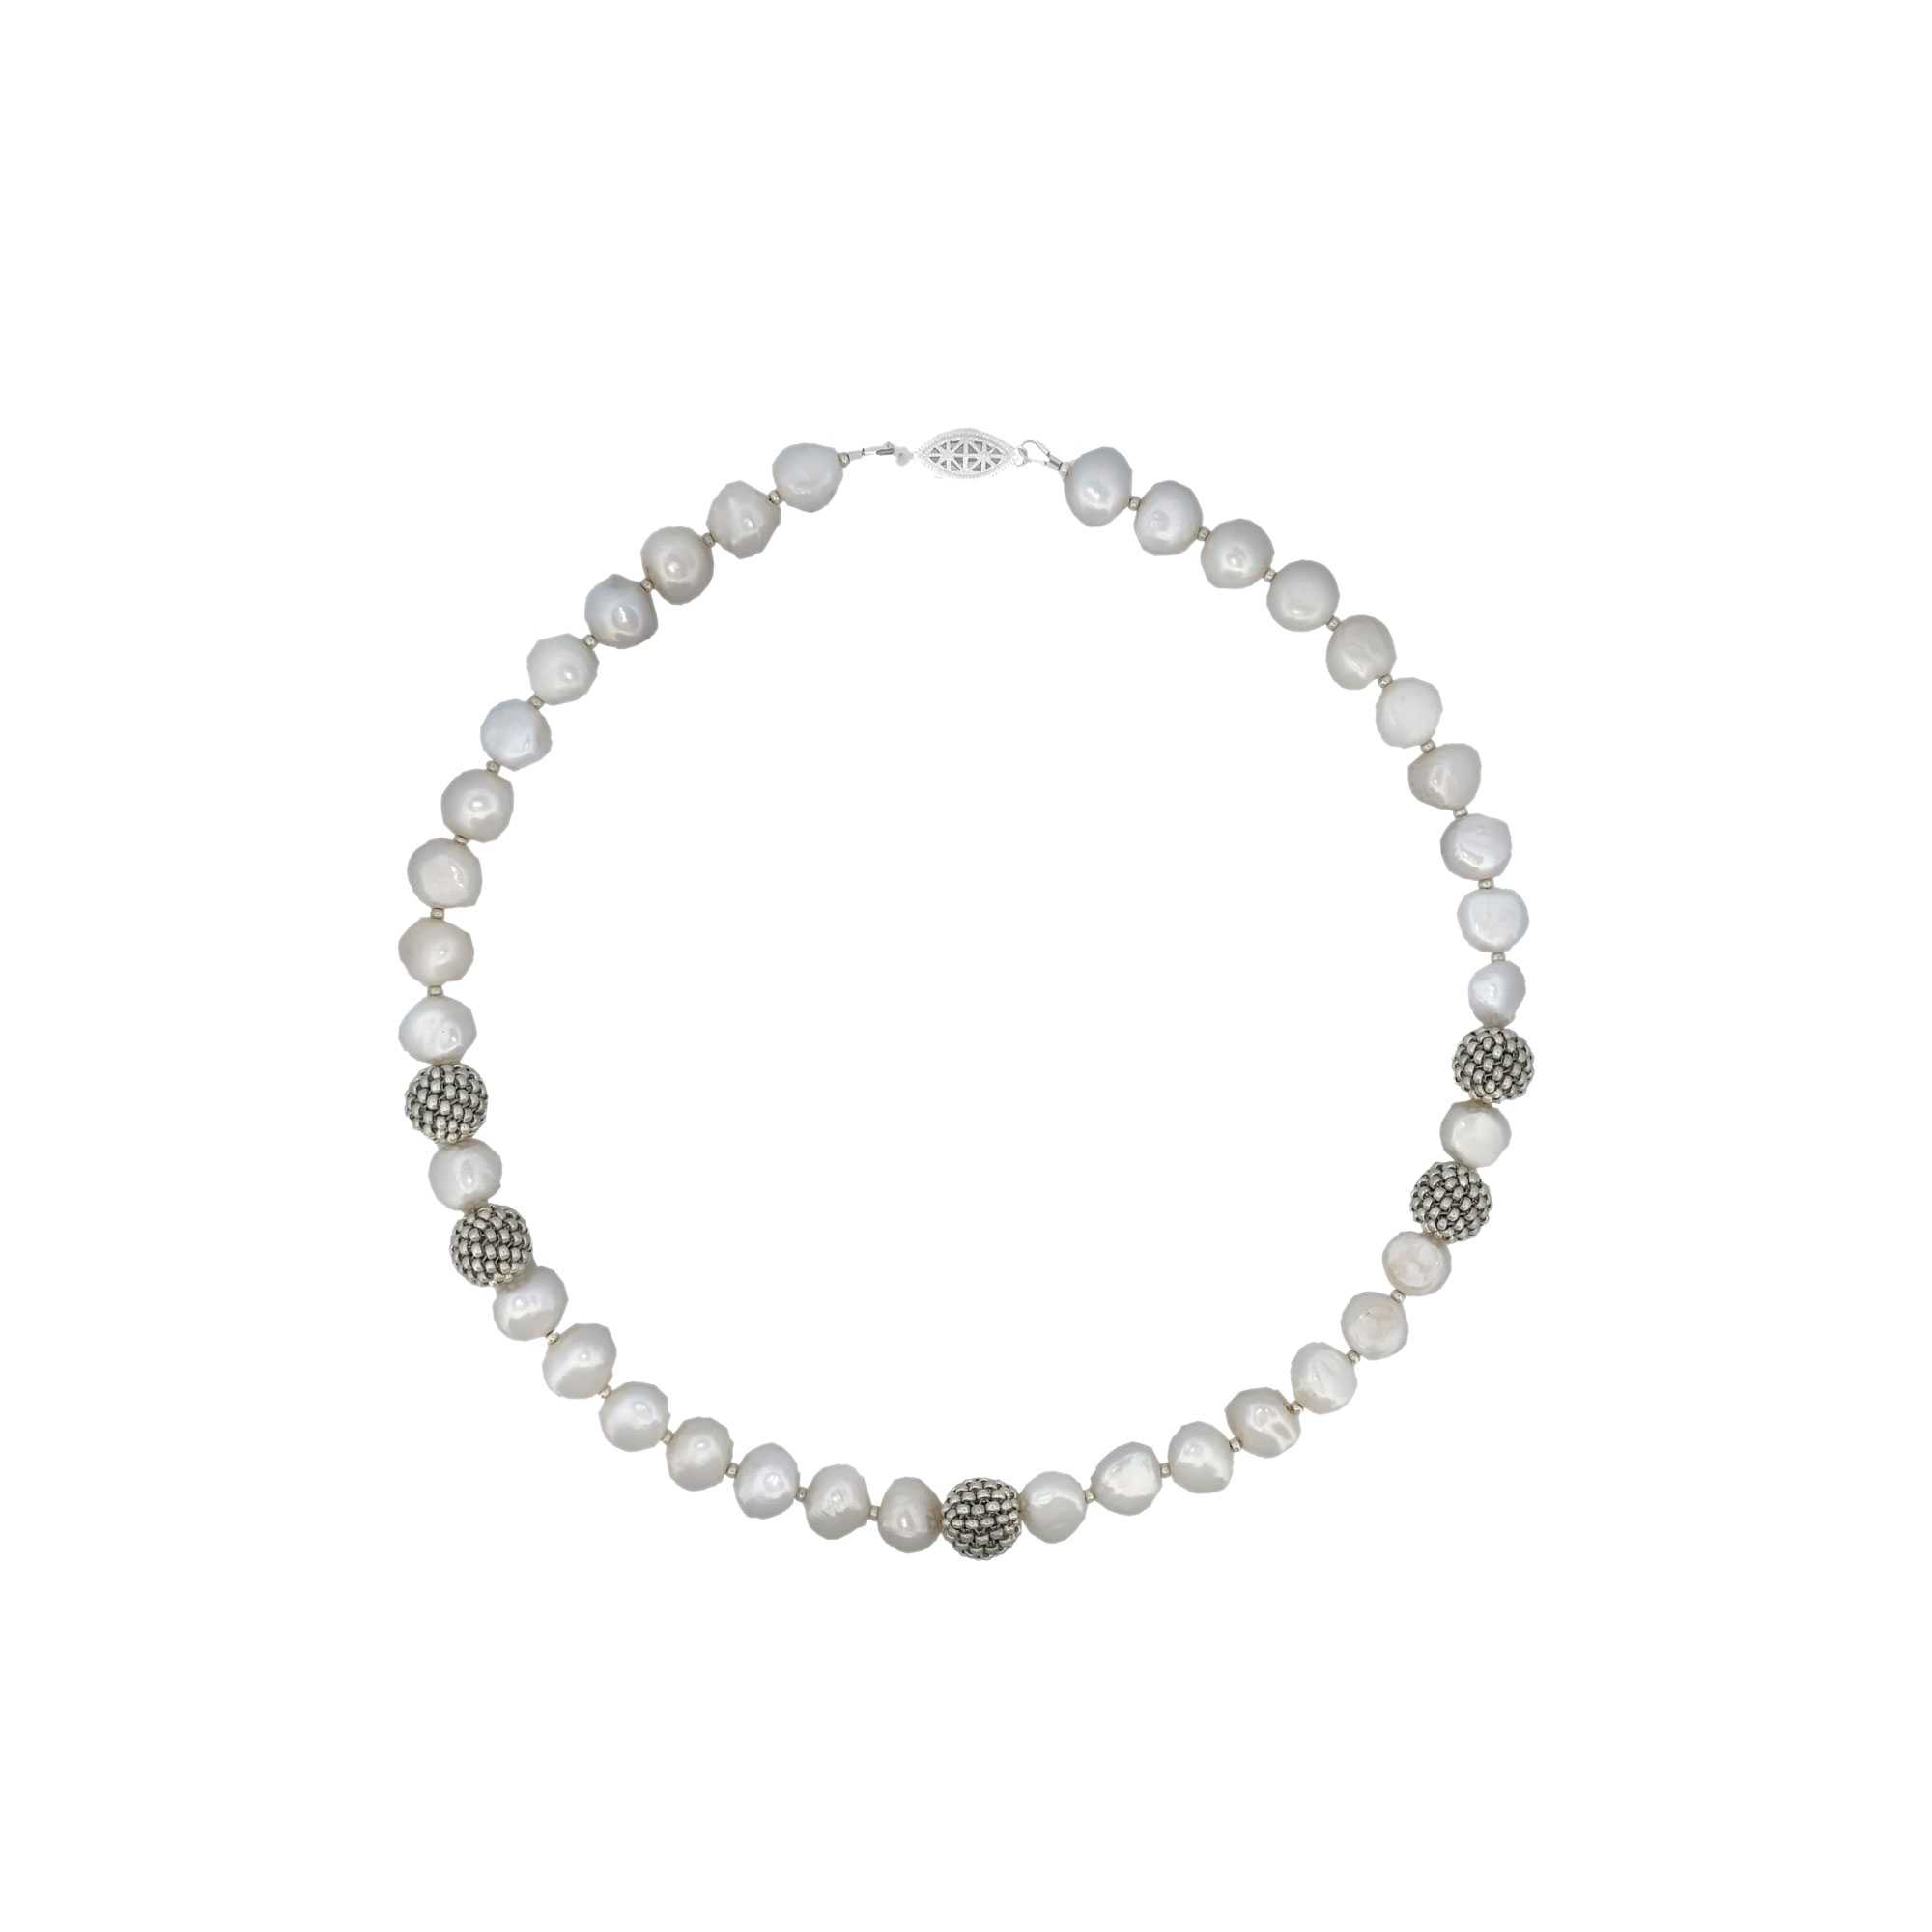 fresh water white Pearl Necklace - | Mali's Fashion Jewelry Women necklace made with White fresh water cultured pearl and Silver